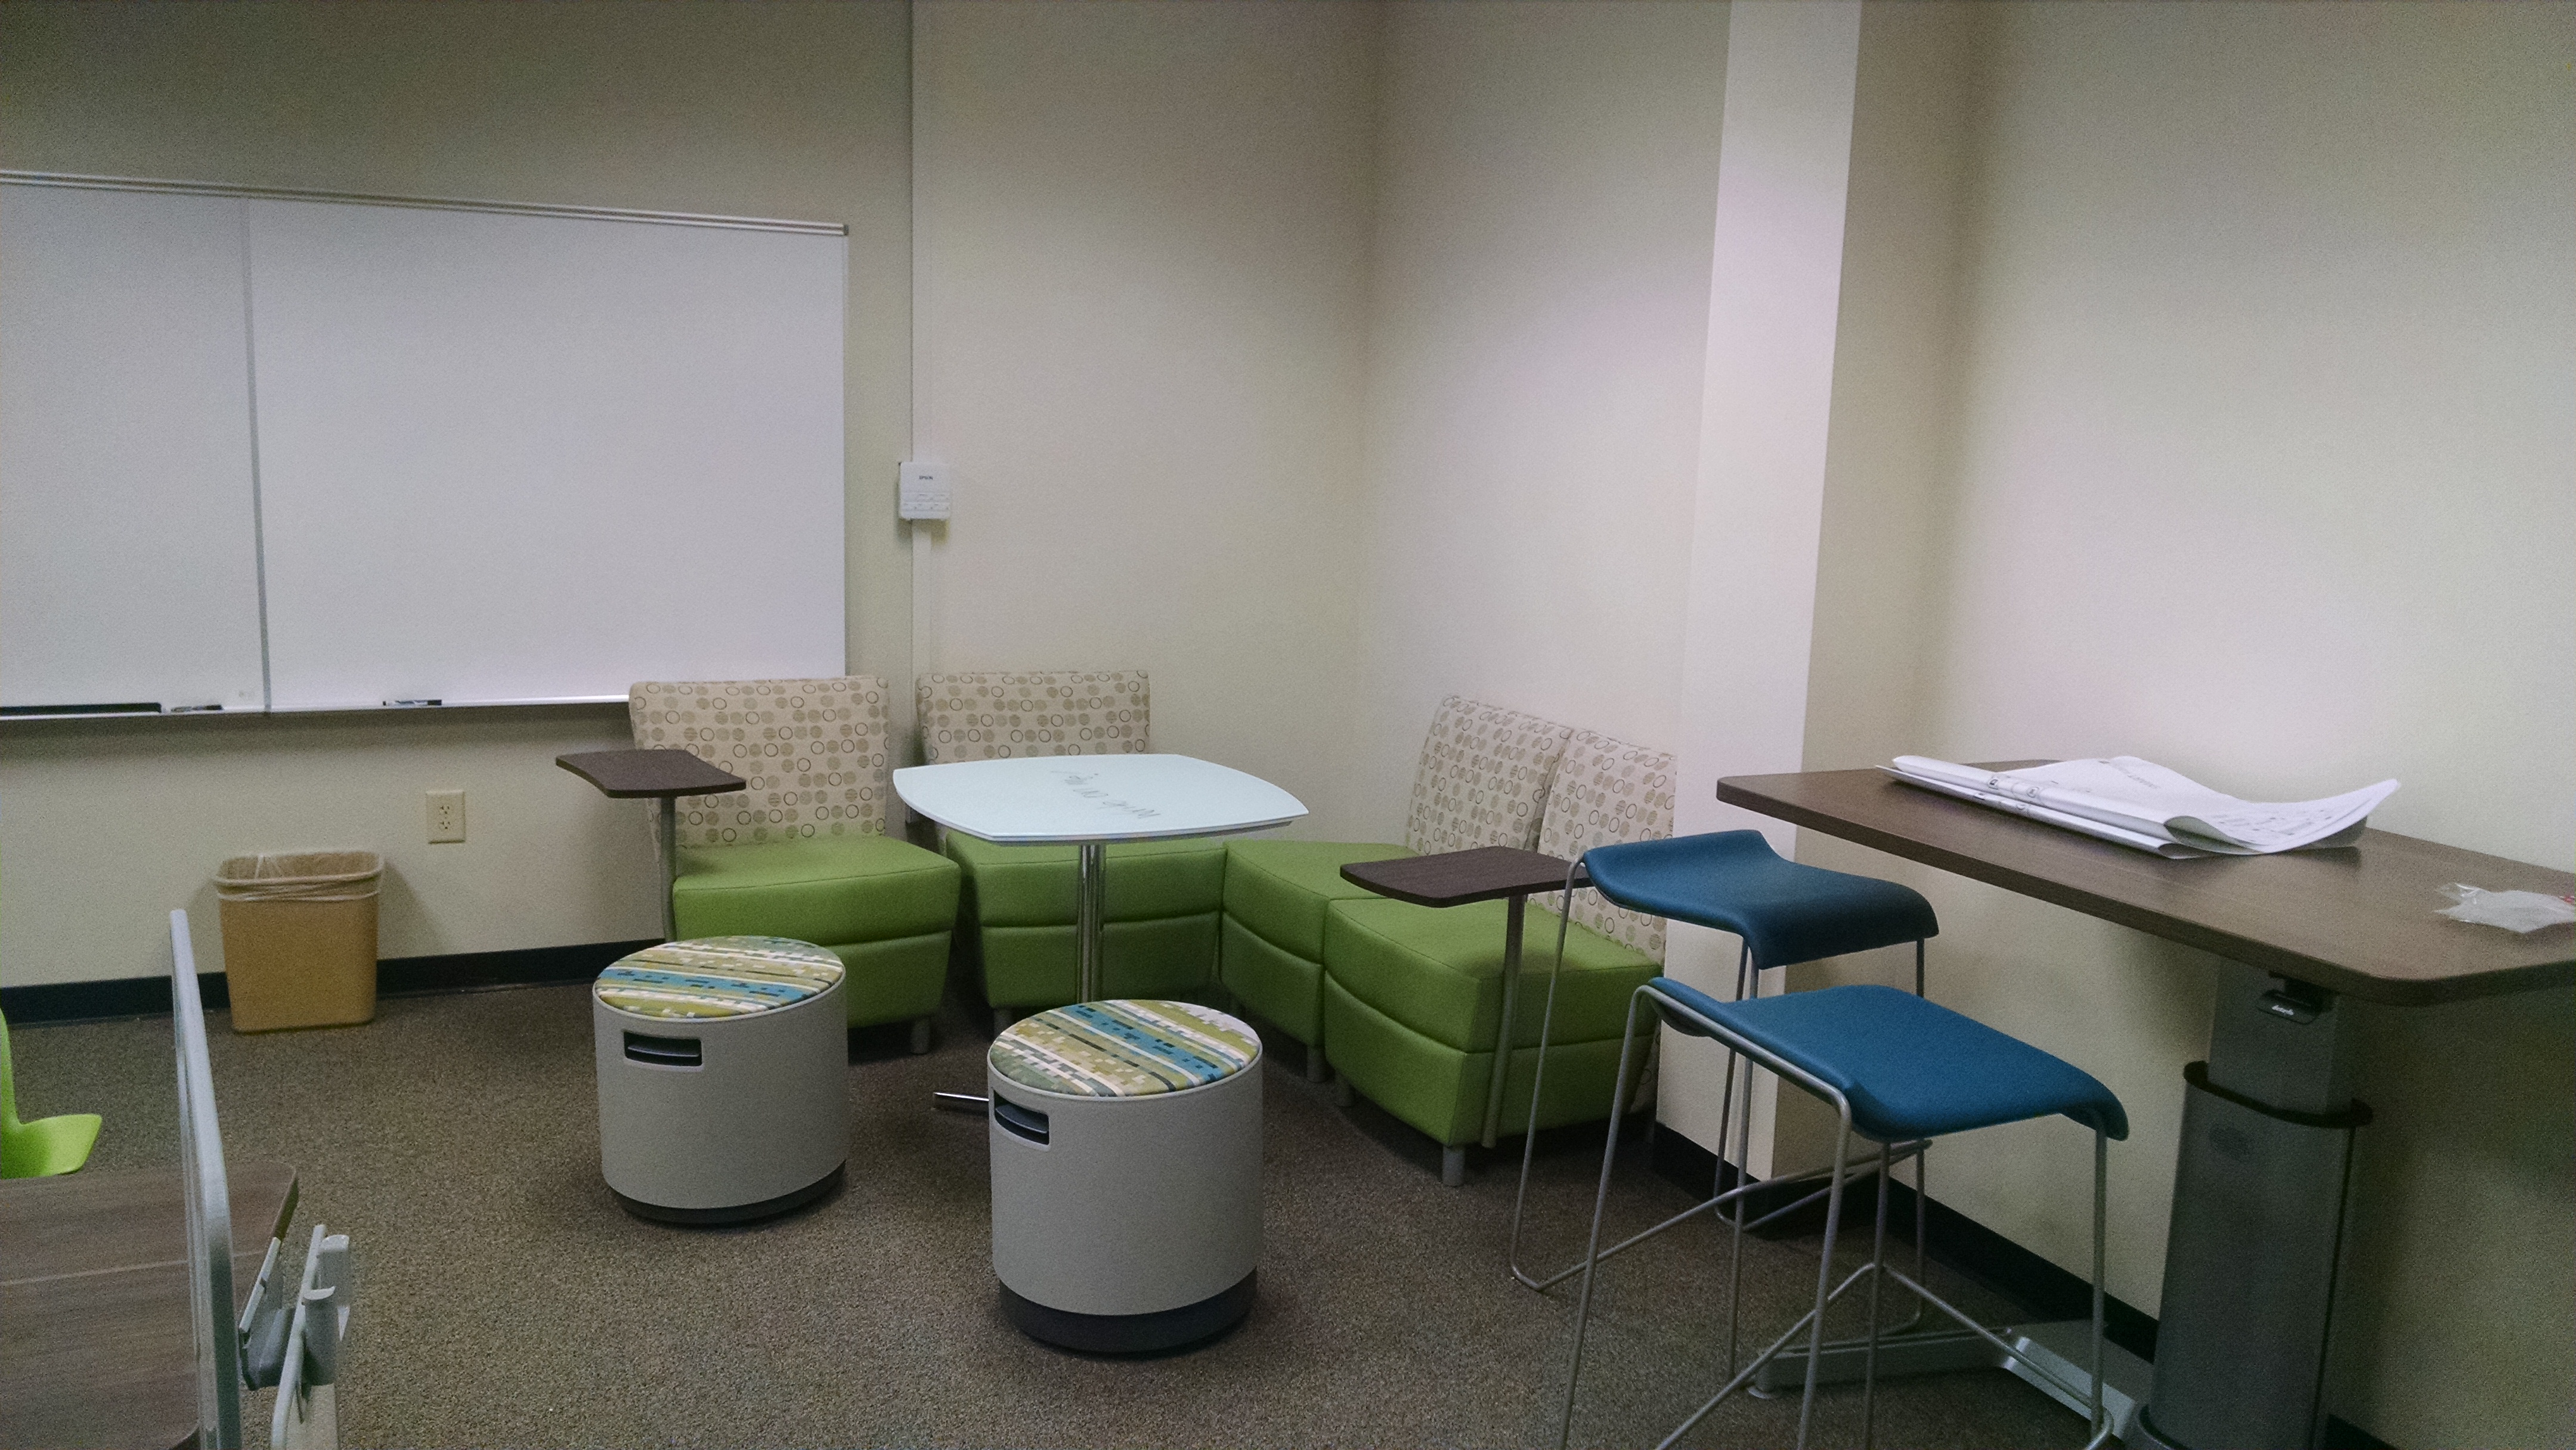 Soft seating nook in the active learning classroom 